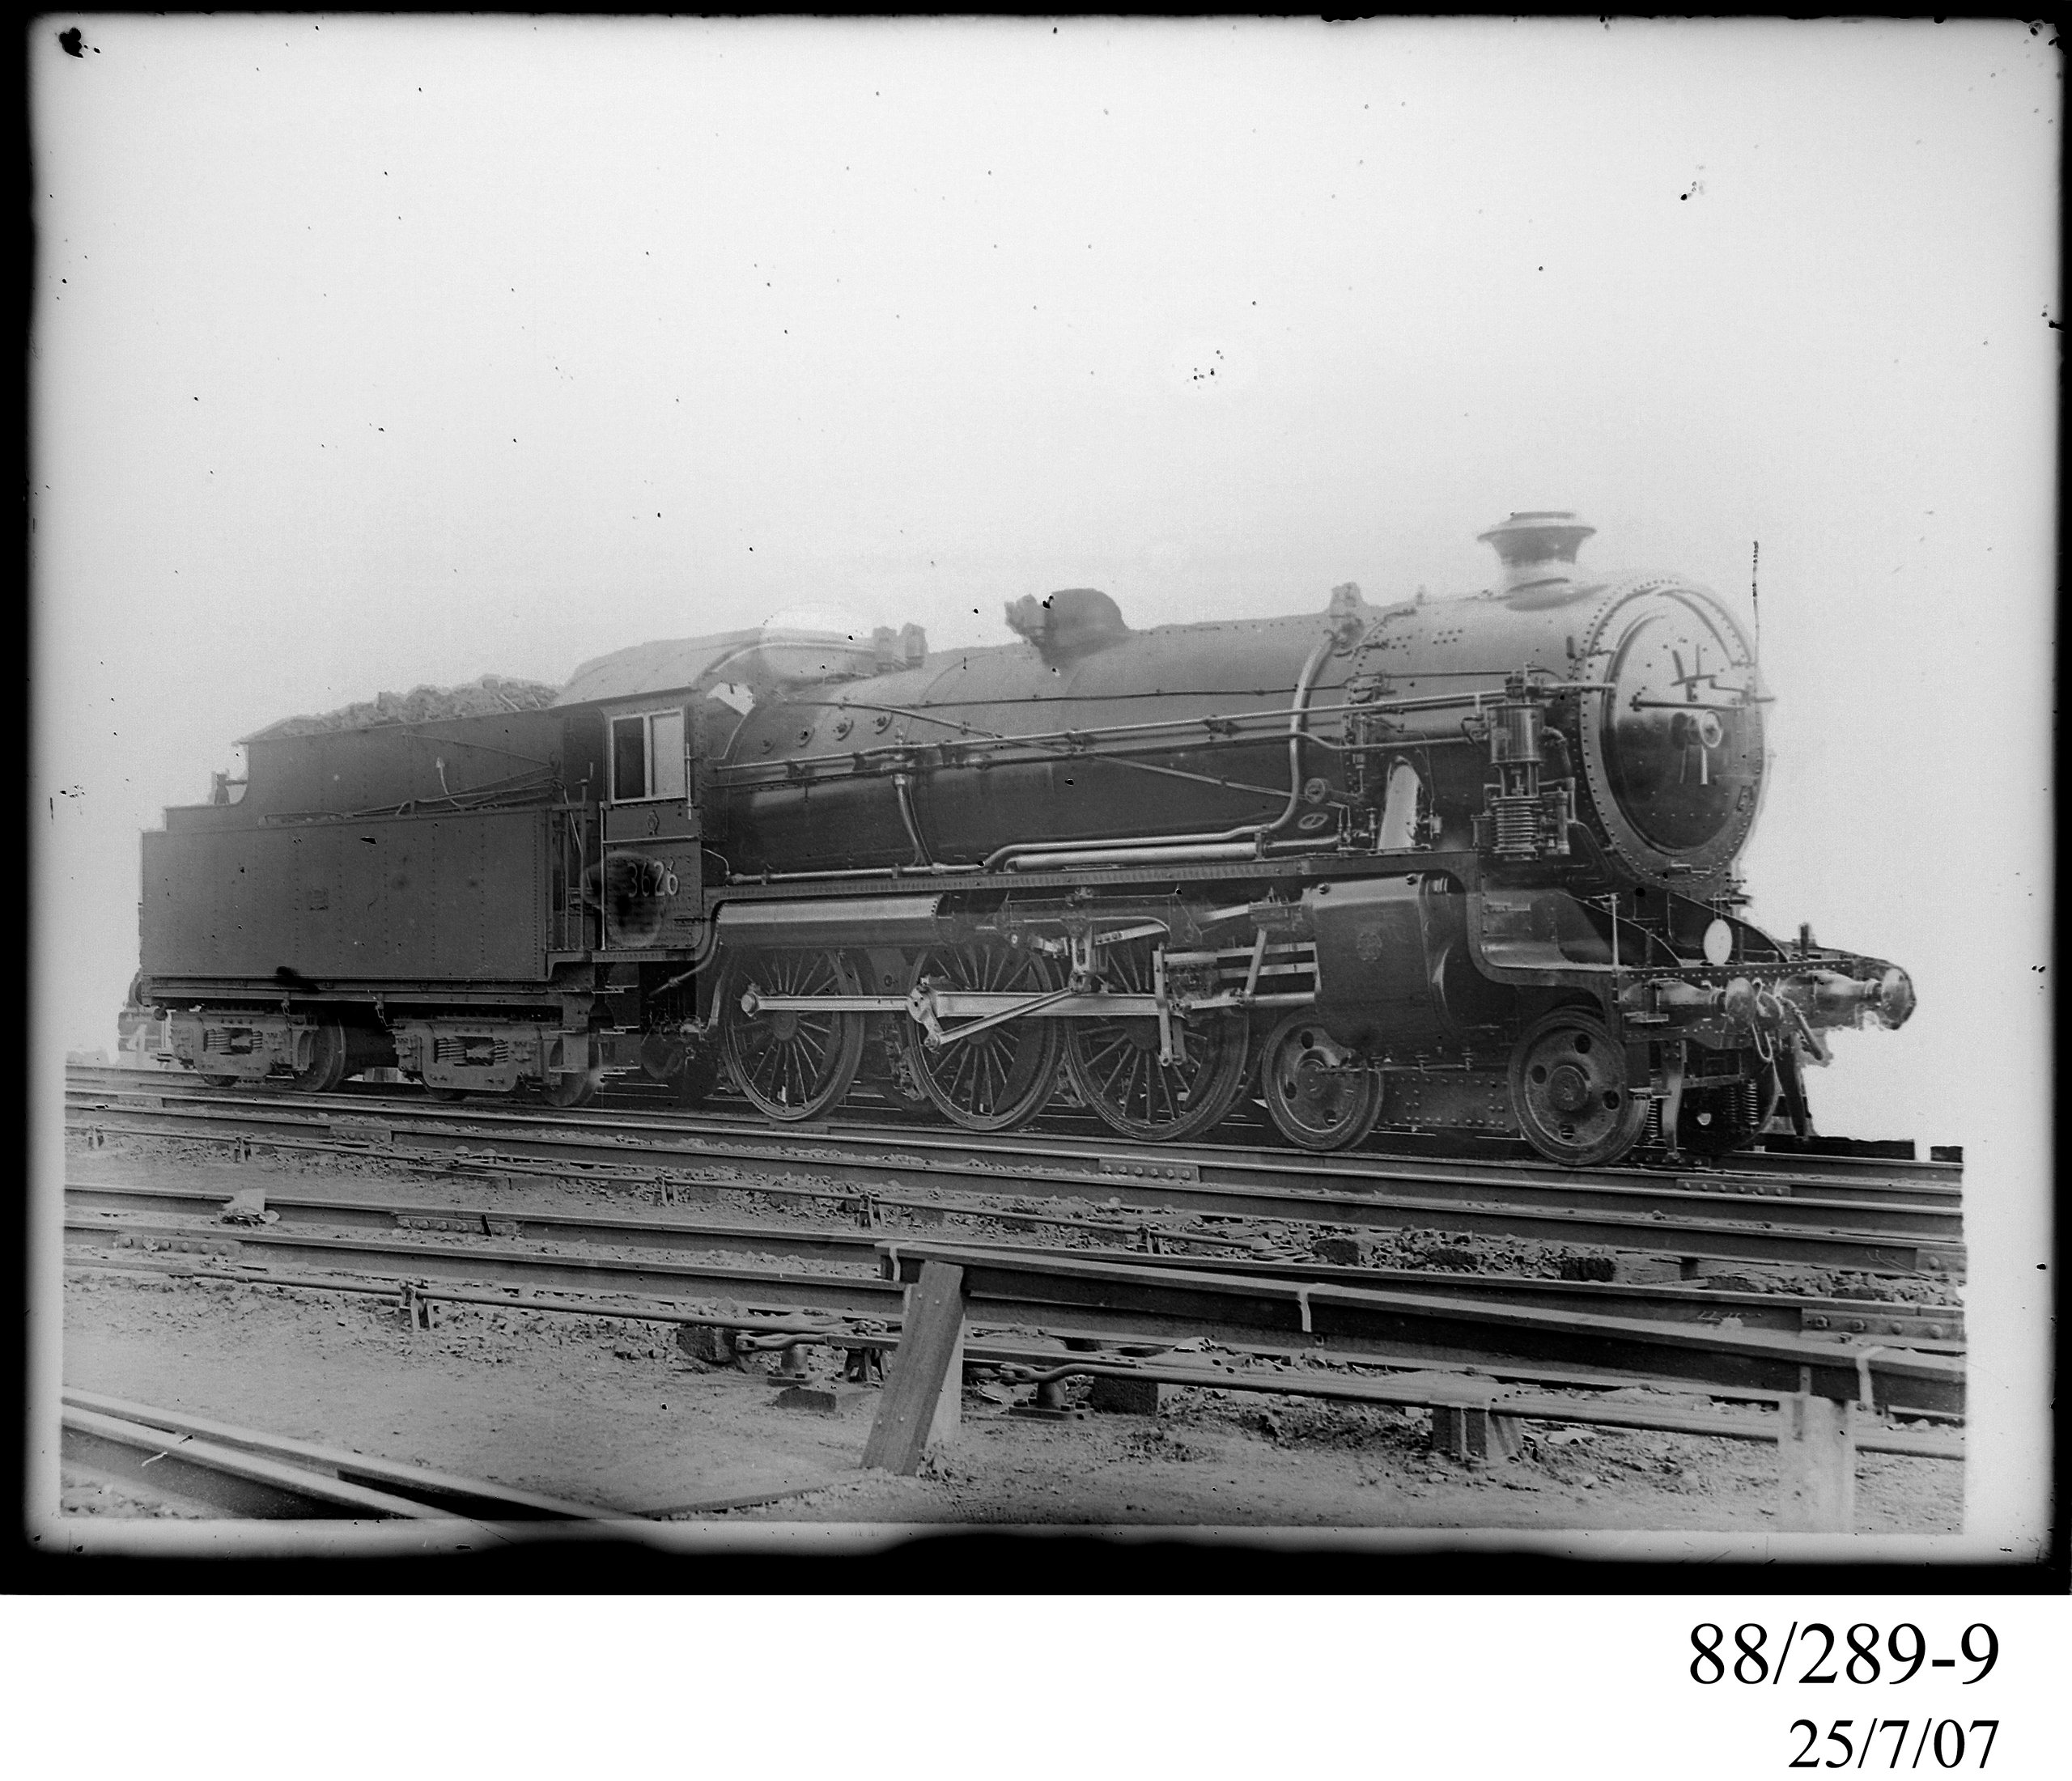 Glass plate negative of locomotive 3626 by Clyde Engineering